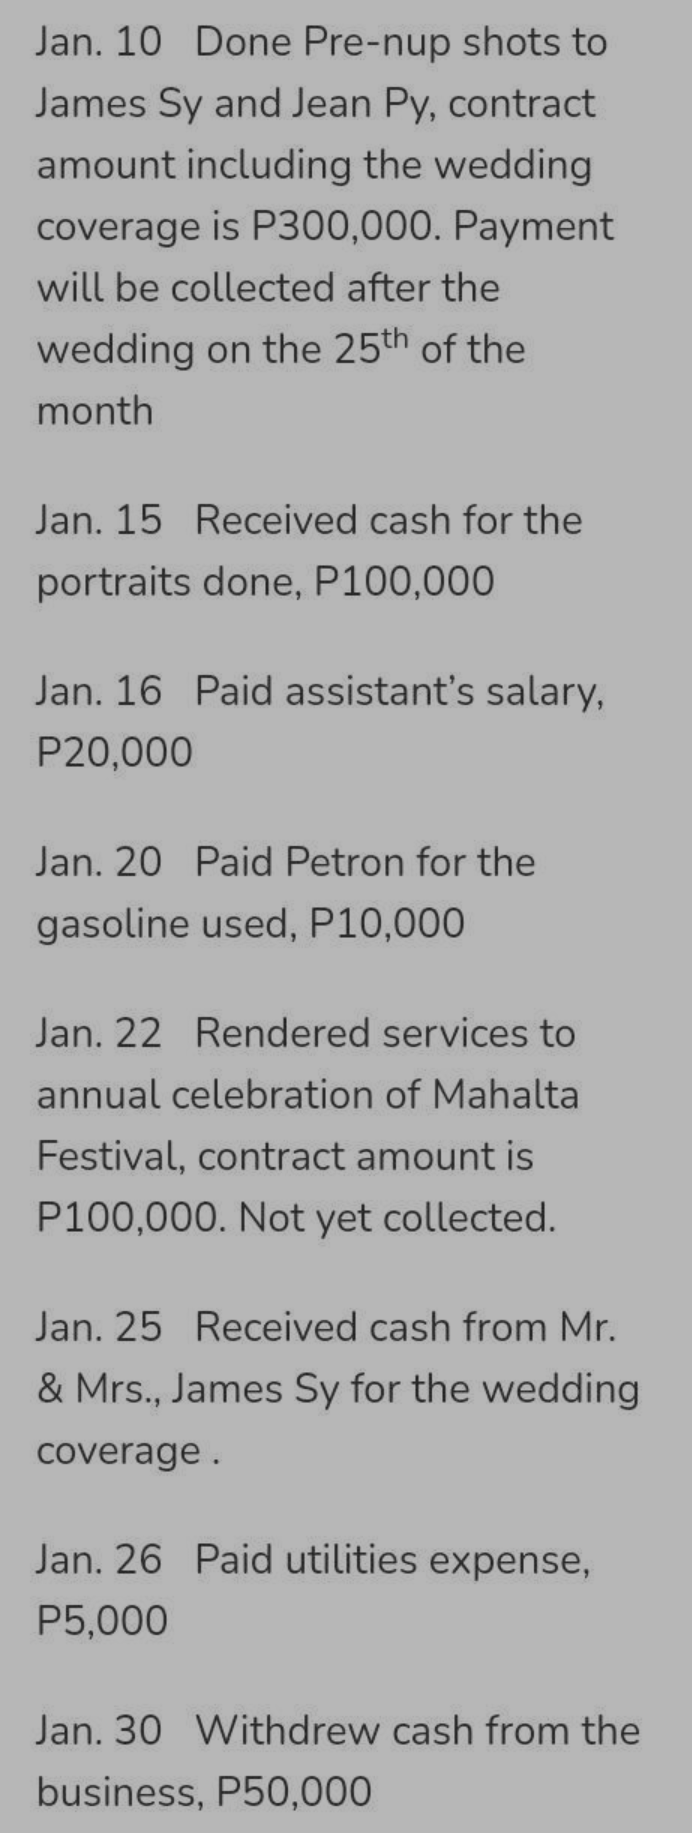 Jan. 10 Done Pre-nup shots to
James Sy and Jean Py, contract
amount including the wedding
coverage is P300,000. Payment
will be collected after the
wedding on the 25th of the
month
Jan. 15 Received cash for the
portraits done, P100,000
Jan. 16 Paid assistant's salary,
P20,000
Jan. 20 Paid Petron for the
gasoline used, P10,000
Jan. 22 Rendered services to
annual celebration of Mahalta
Festival, contract amount is
P100,000. Not yet collected.
Jan. 25 Received cash from Mr.
& Mrs., James Sy for the wedding
coverage.
Jan. 26 Paid utilities expense,
P5,000
Jan. 30 Withdrew cash from the
business, P50,000
